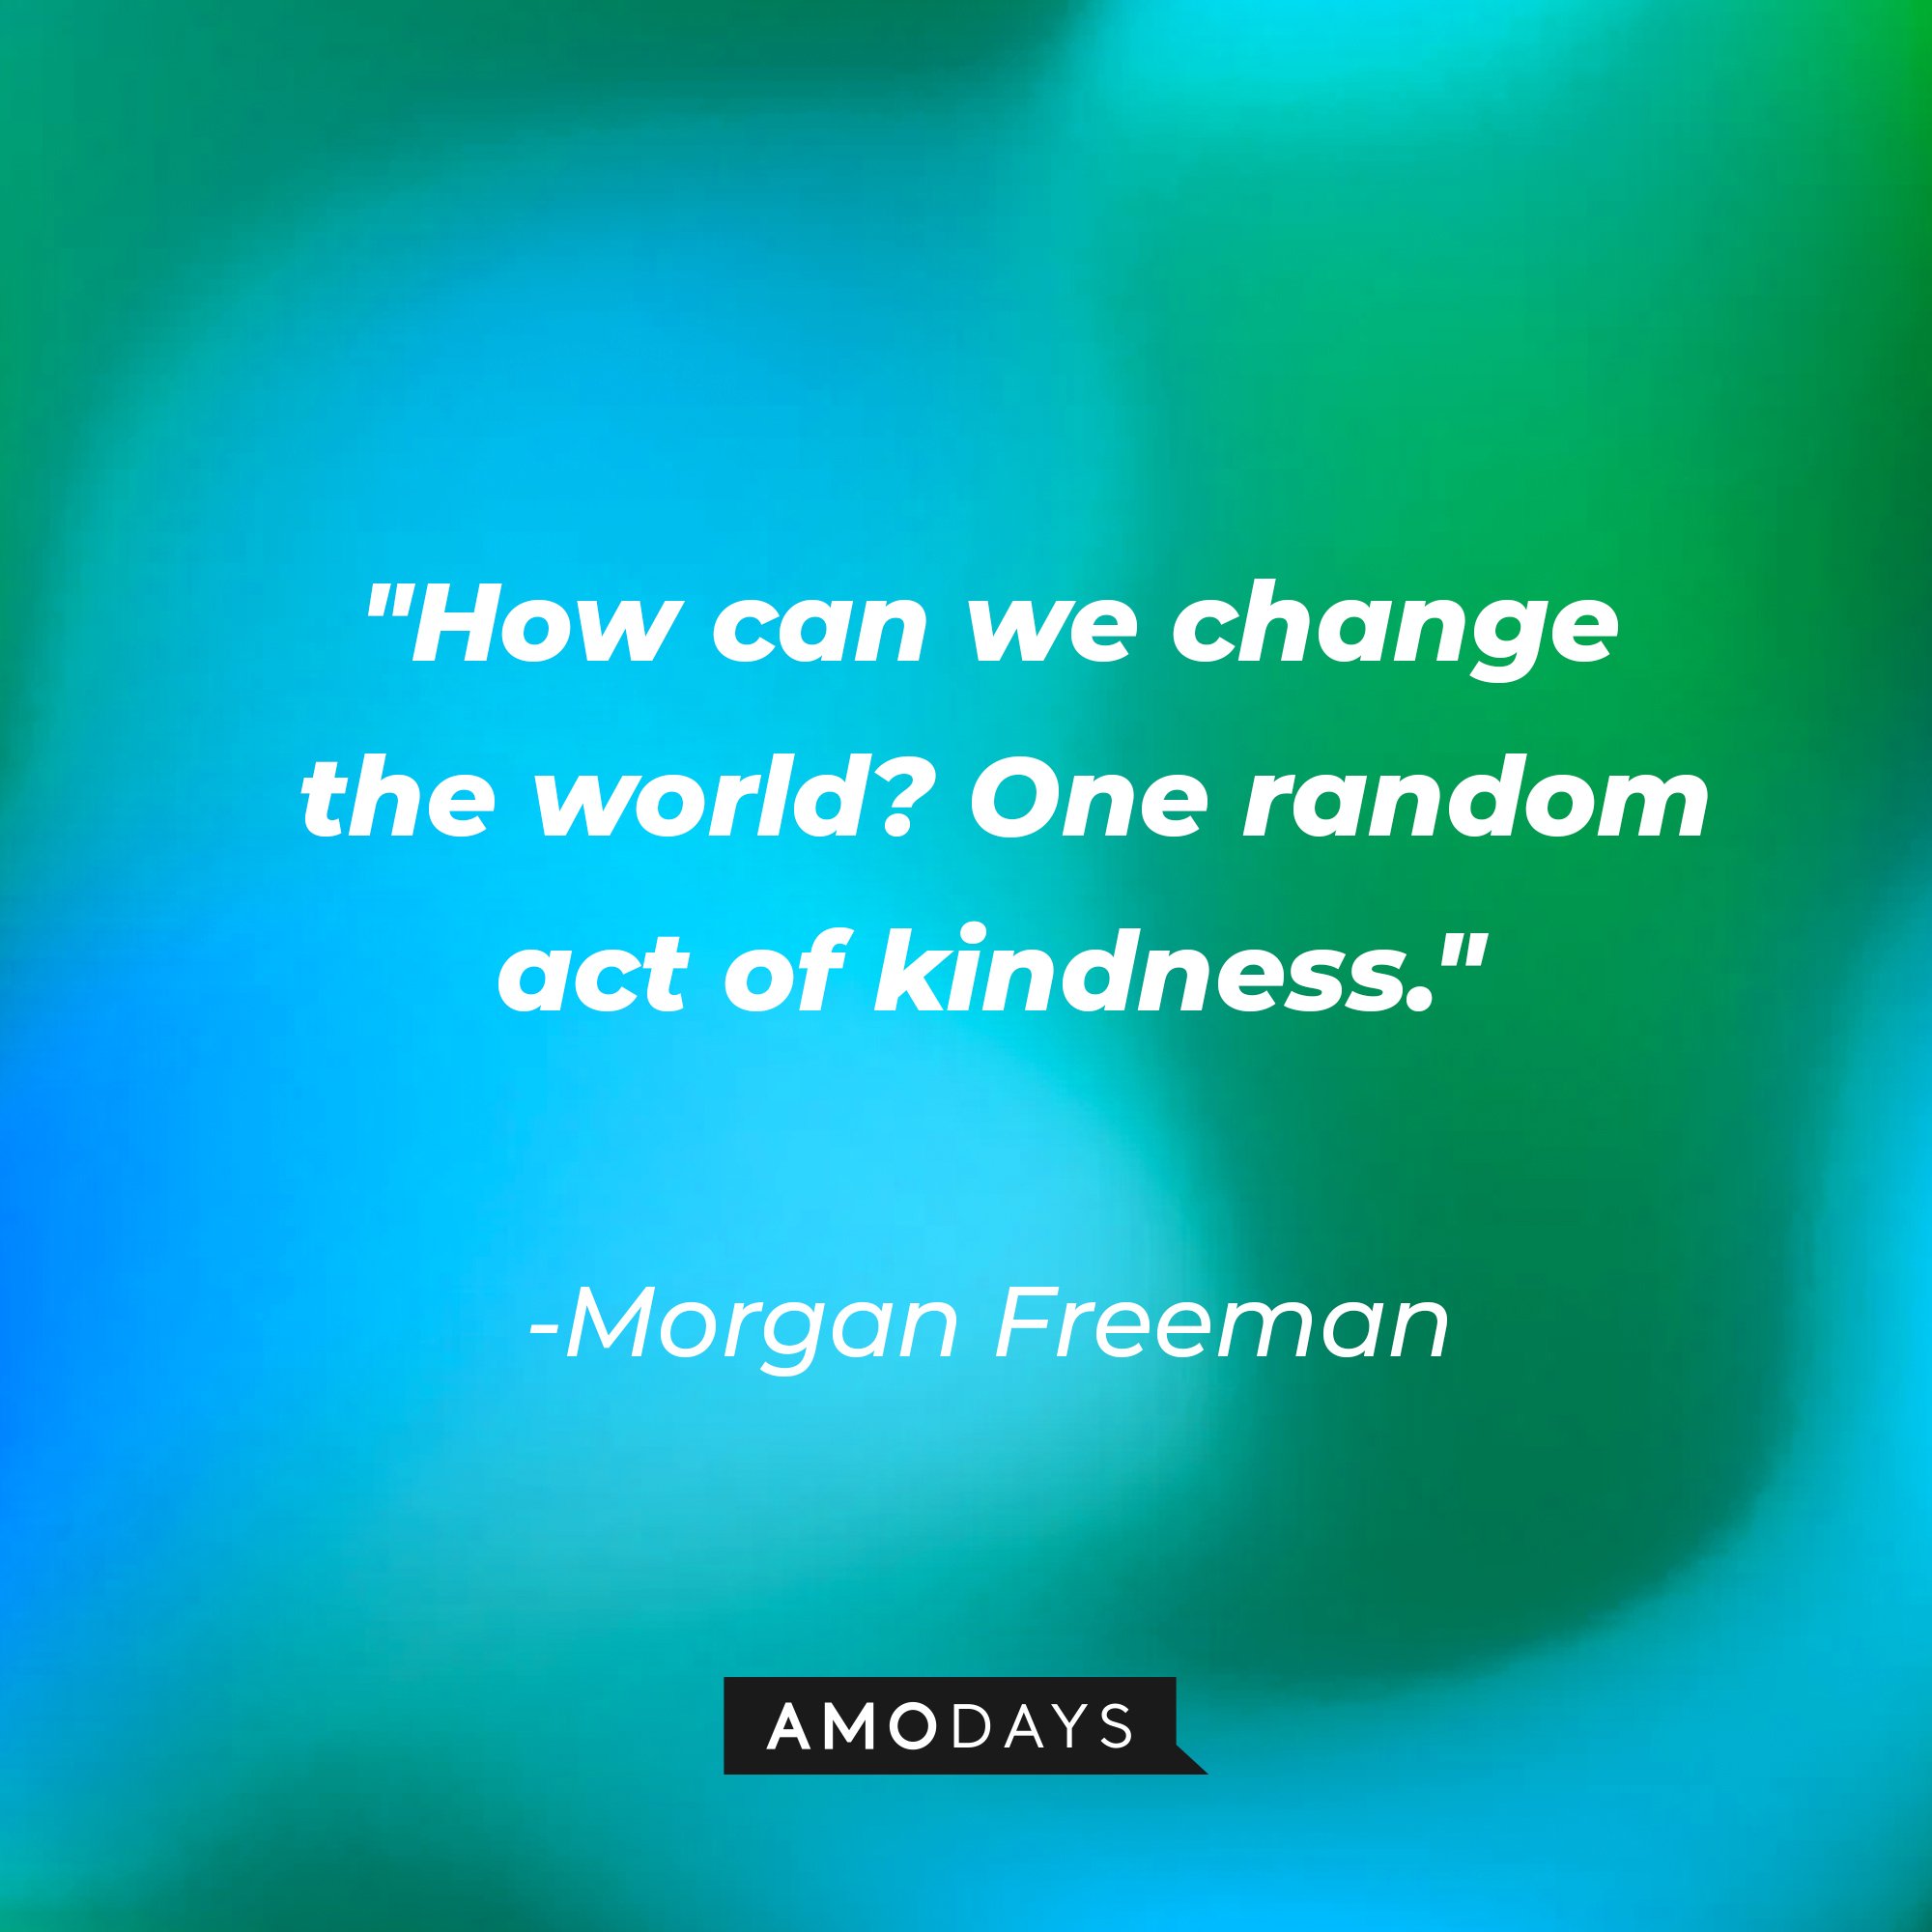 Morgan Freeman’s quote: "How can we change the world? One random act of kindness." | Image: AmoDays  